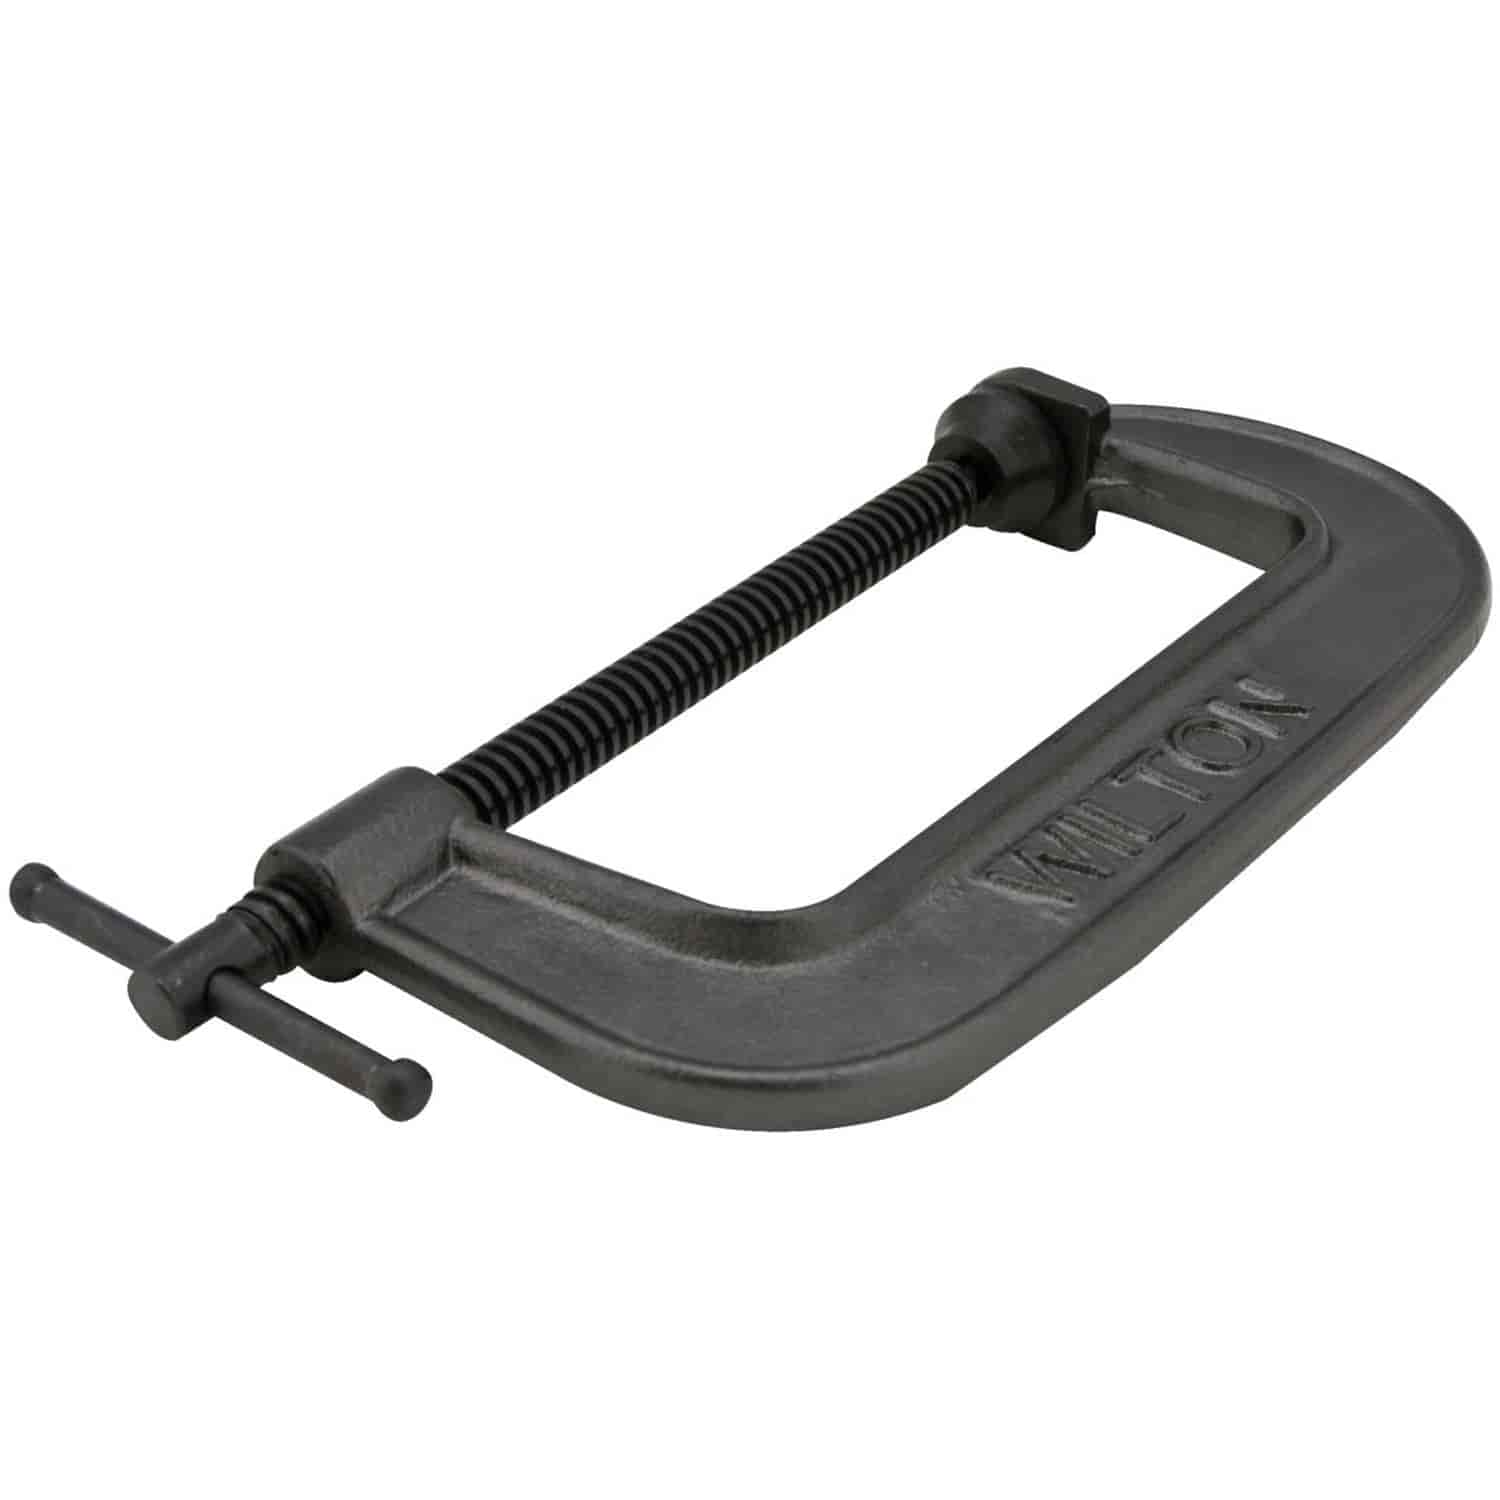 540A Series C-Clamp Opening Capacity Max: 5"